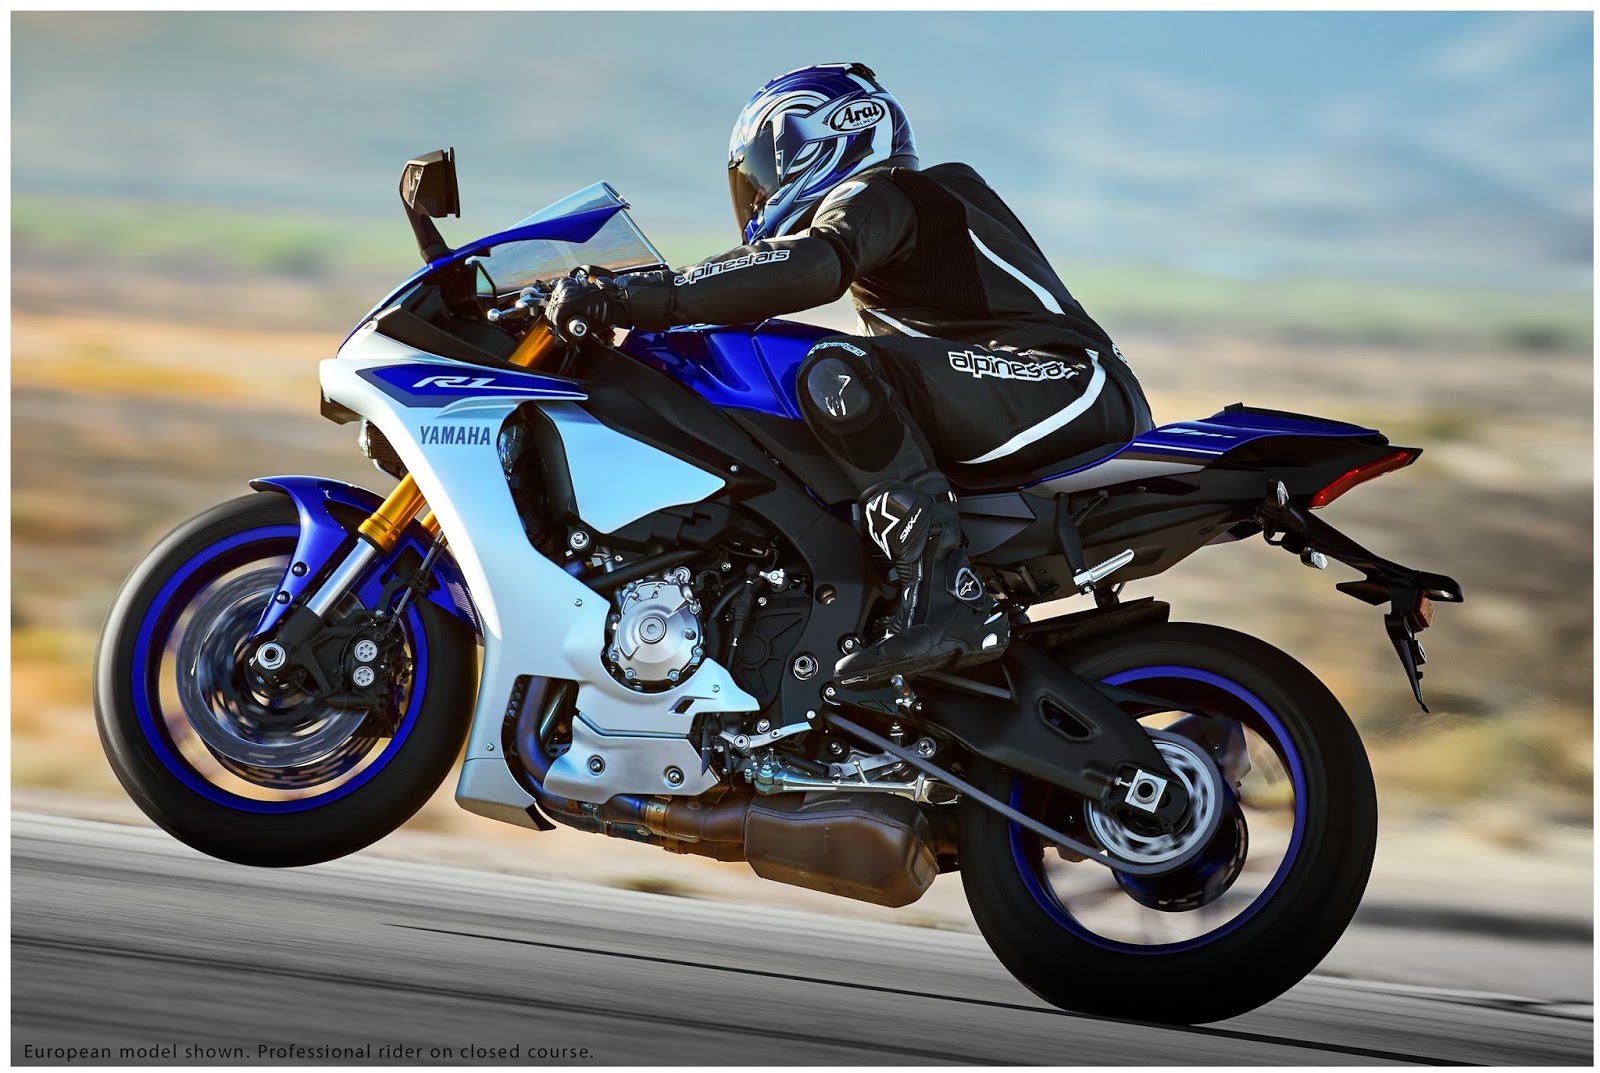 2015 Yamaha R1 Motorcycle Prices